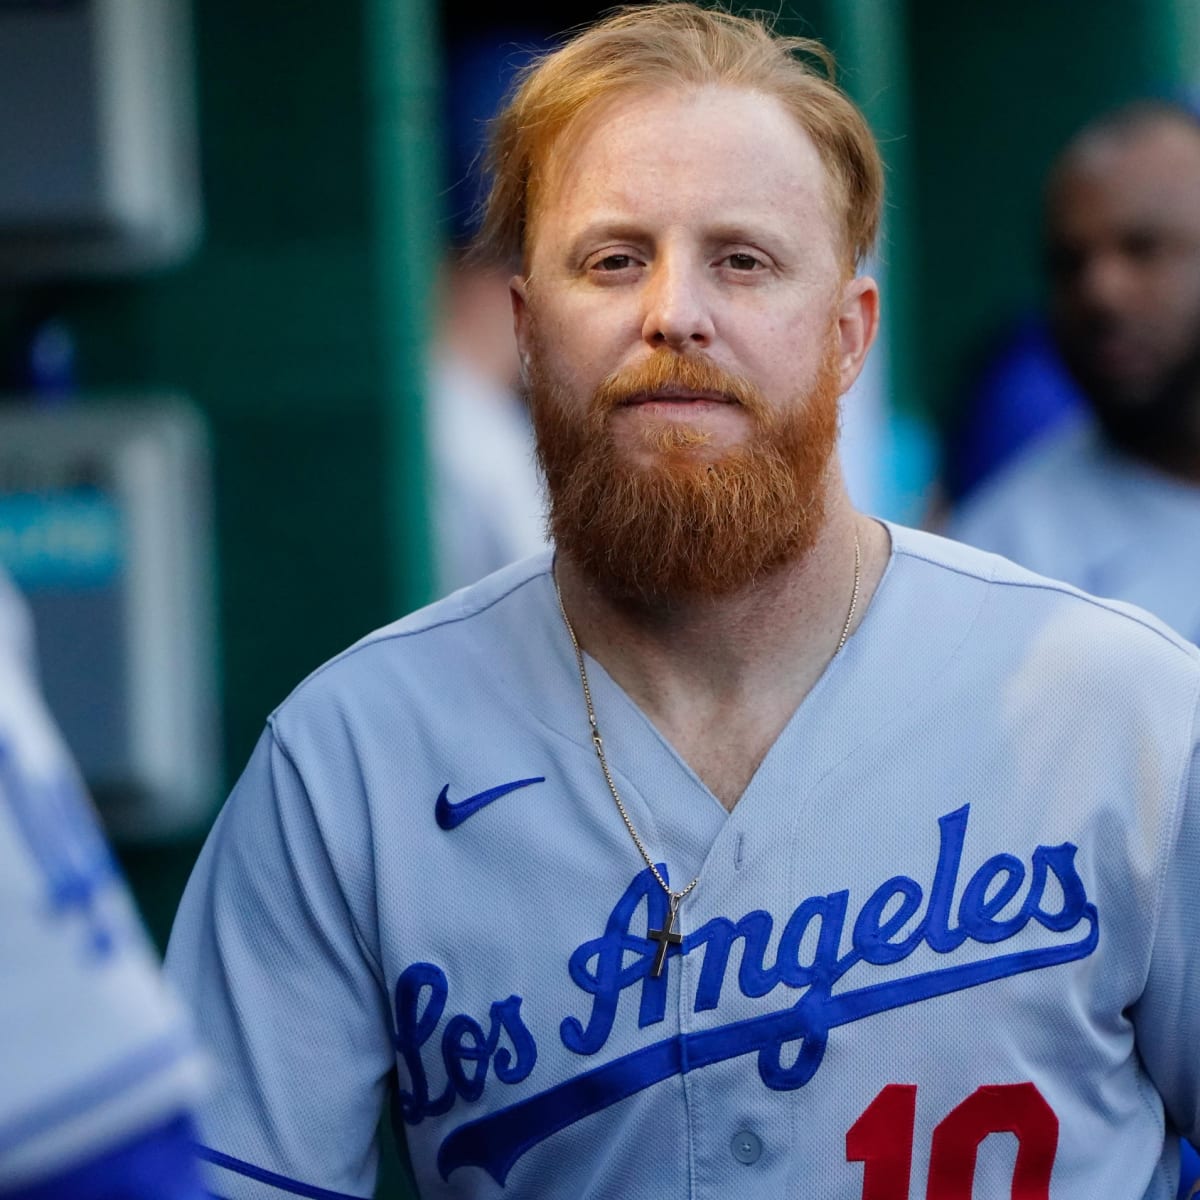 Justin Turner Jerseys & Gear  Curbside Pickup Available at DICK'S